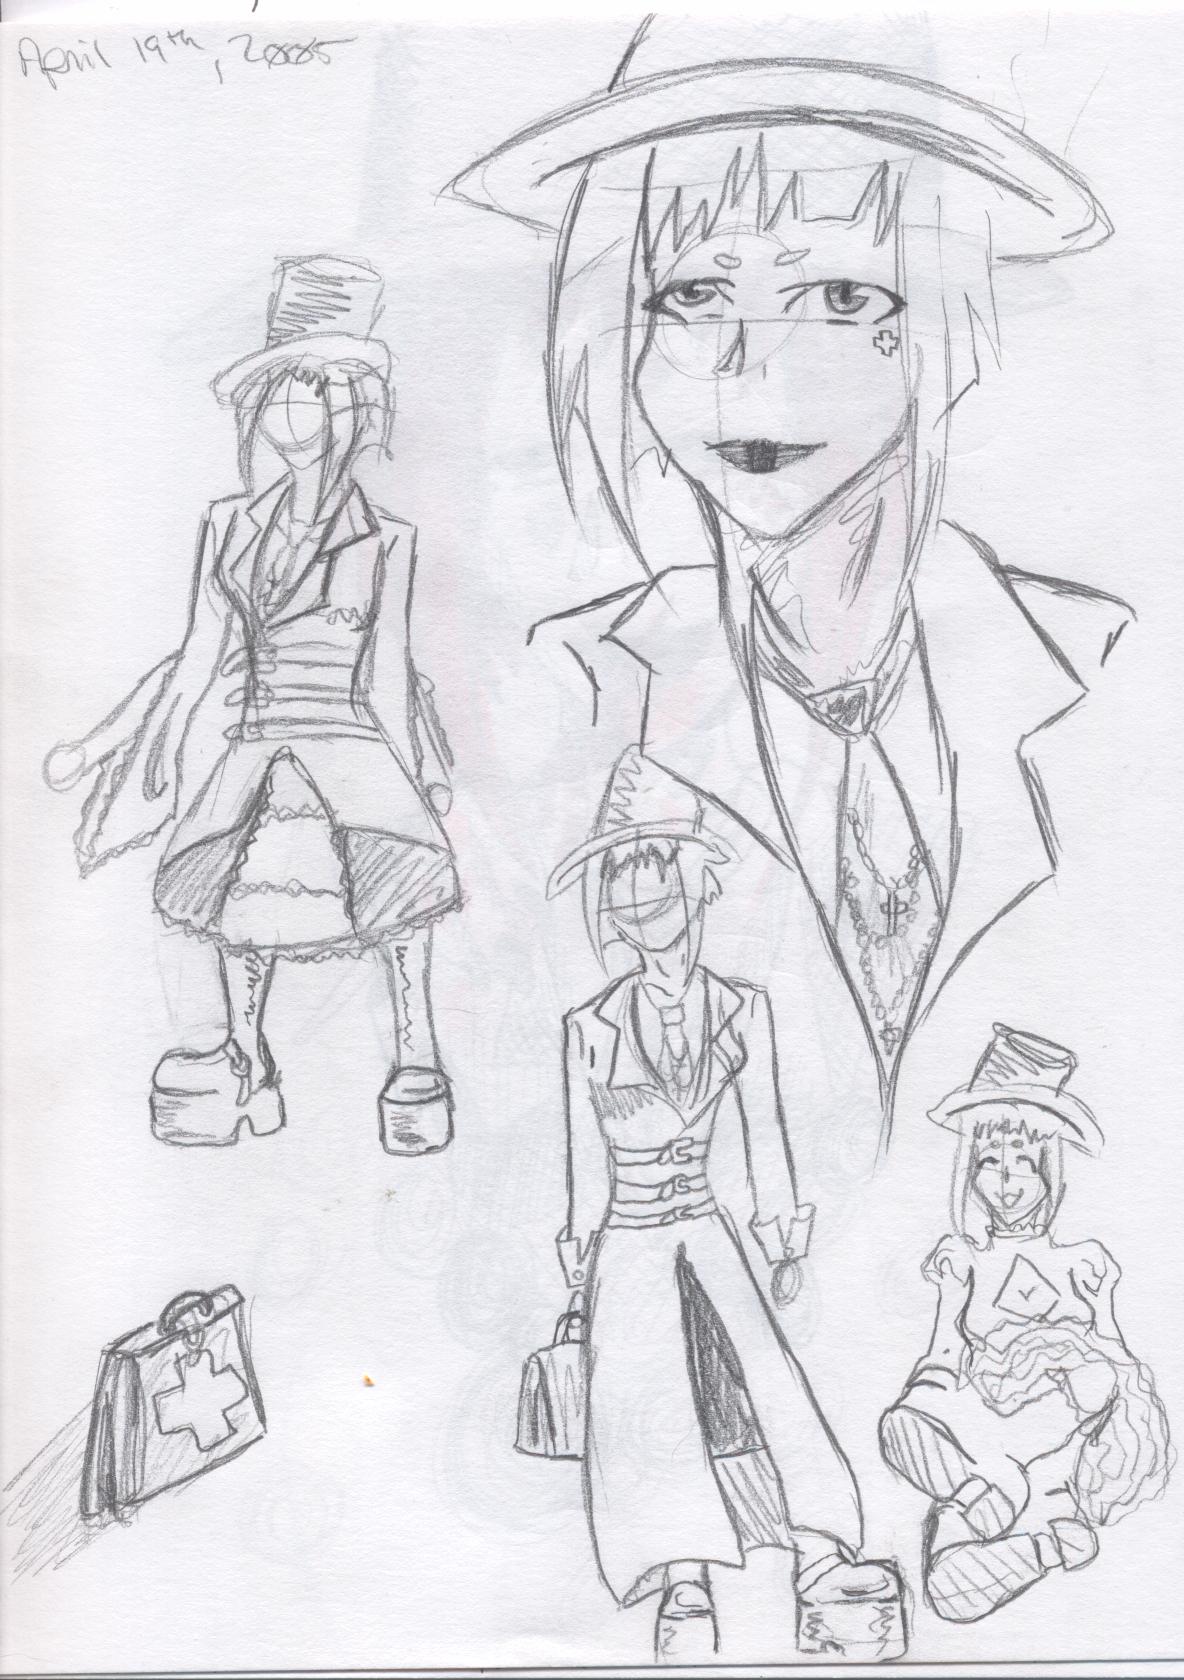 Early sketches of "Jack" by FaustVIII